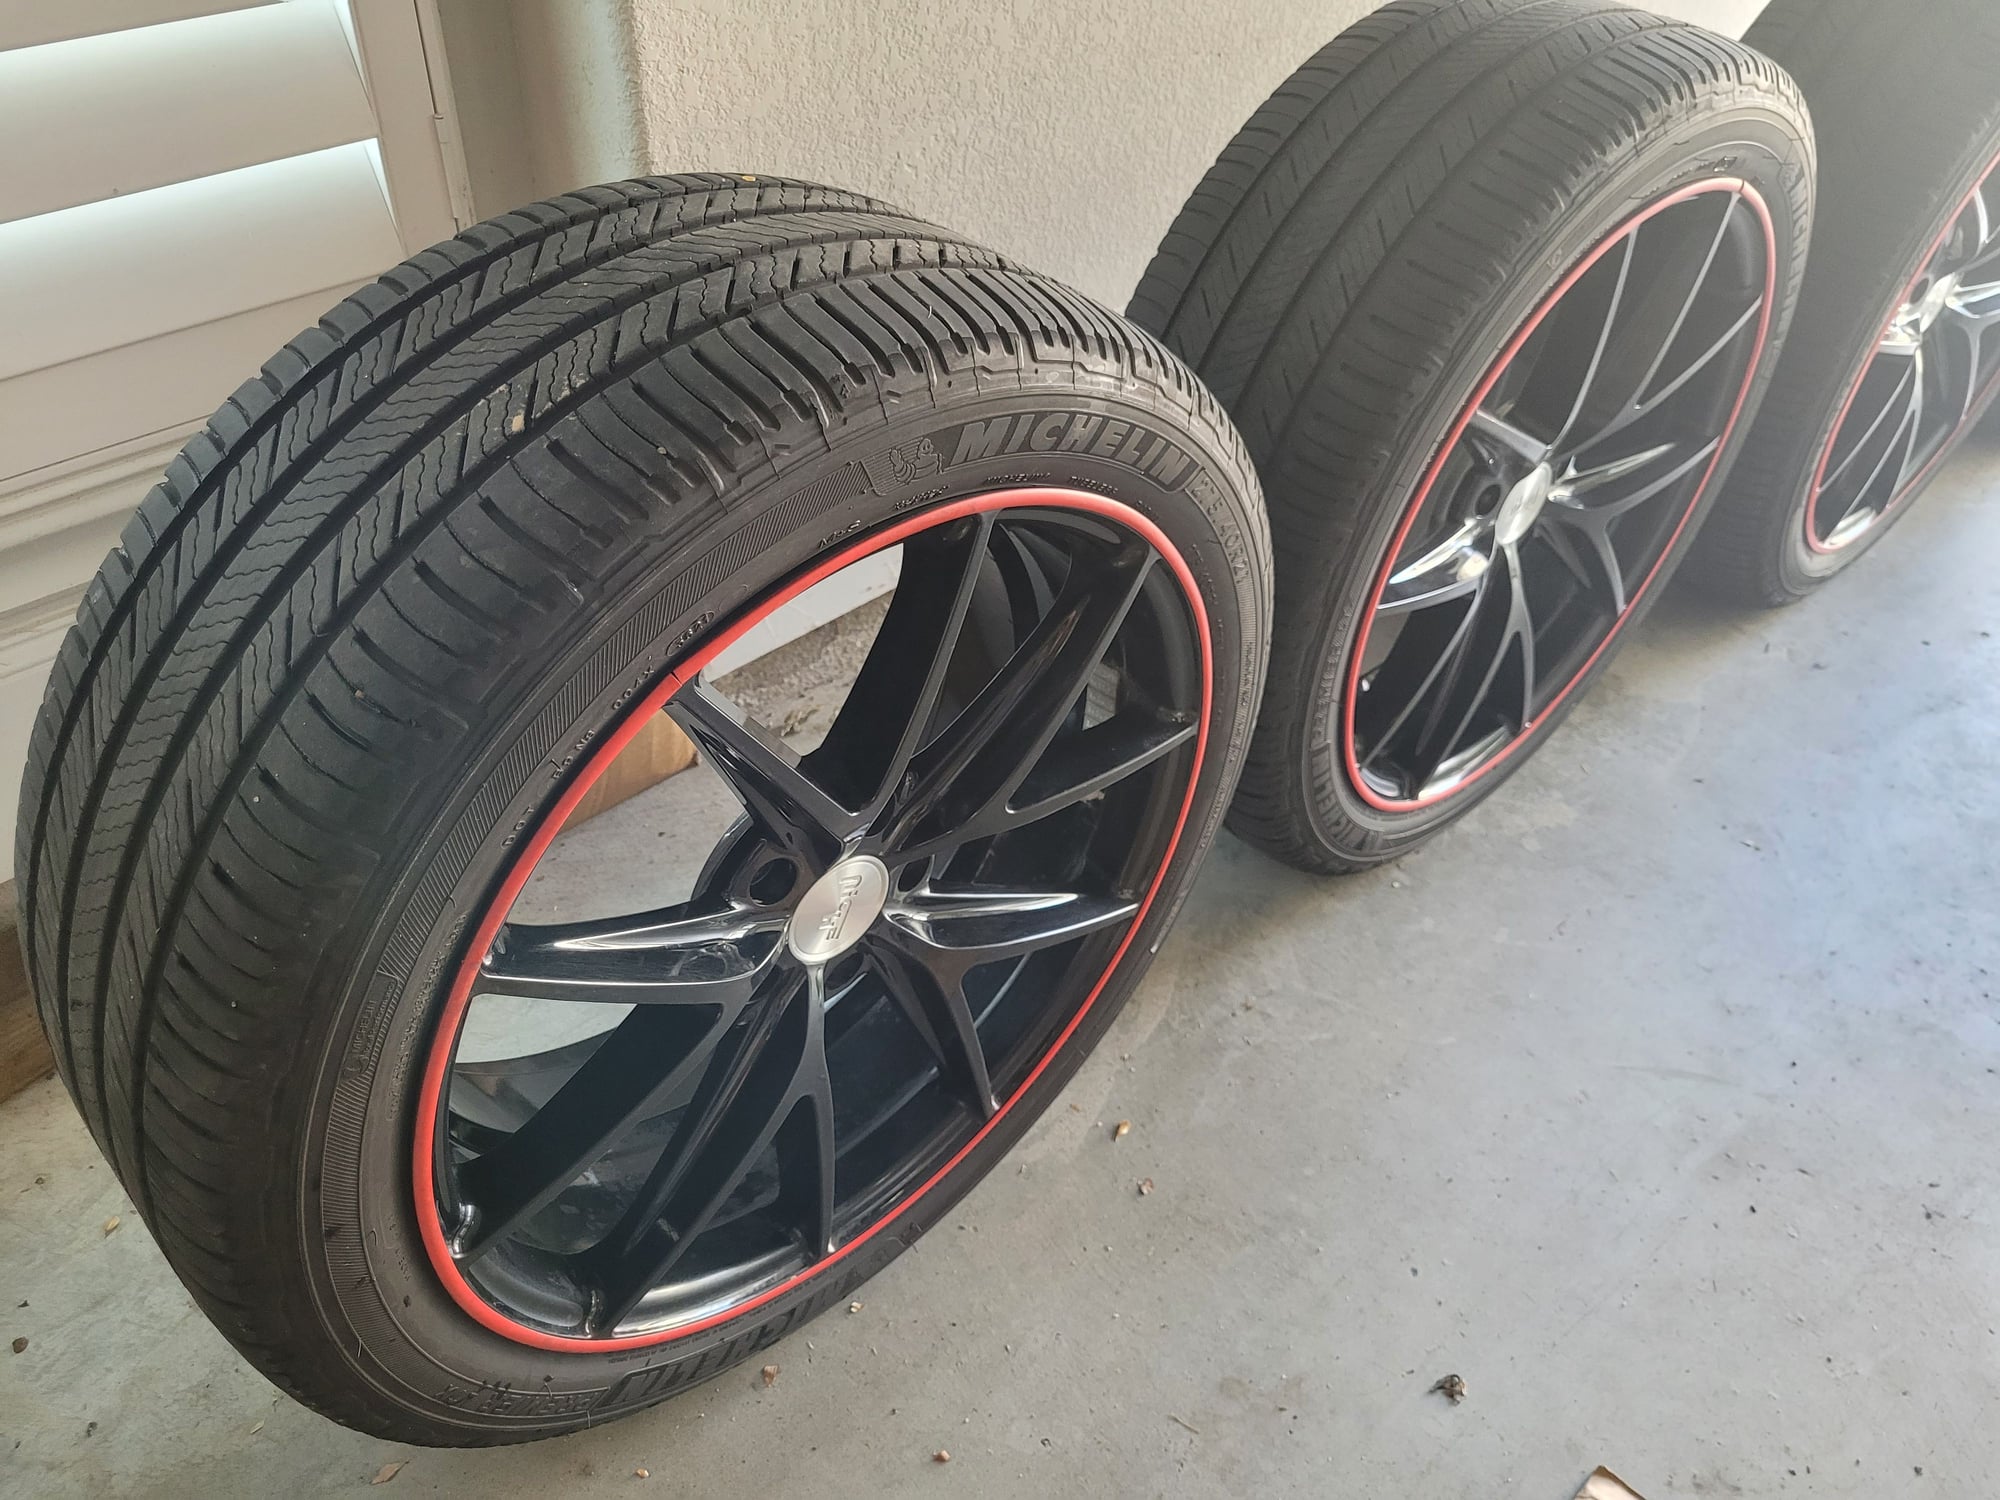 Wheels and Tires/Axles - Niche 21" wheels Michelin Premier LTX Tires 2007-2016 Q7 - Used - Katy, TX 77493, United States